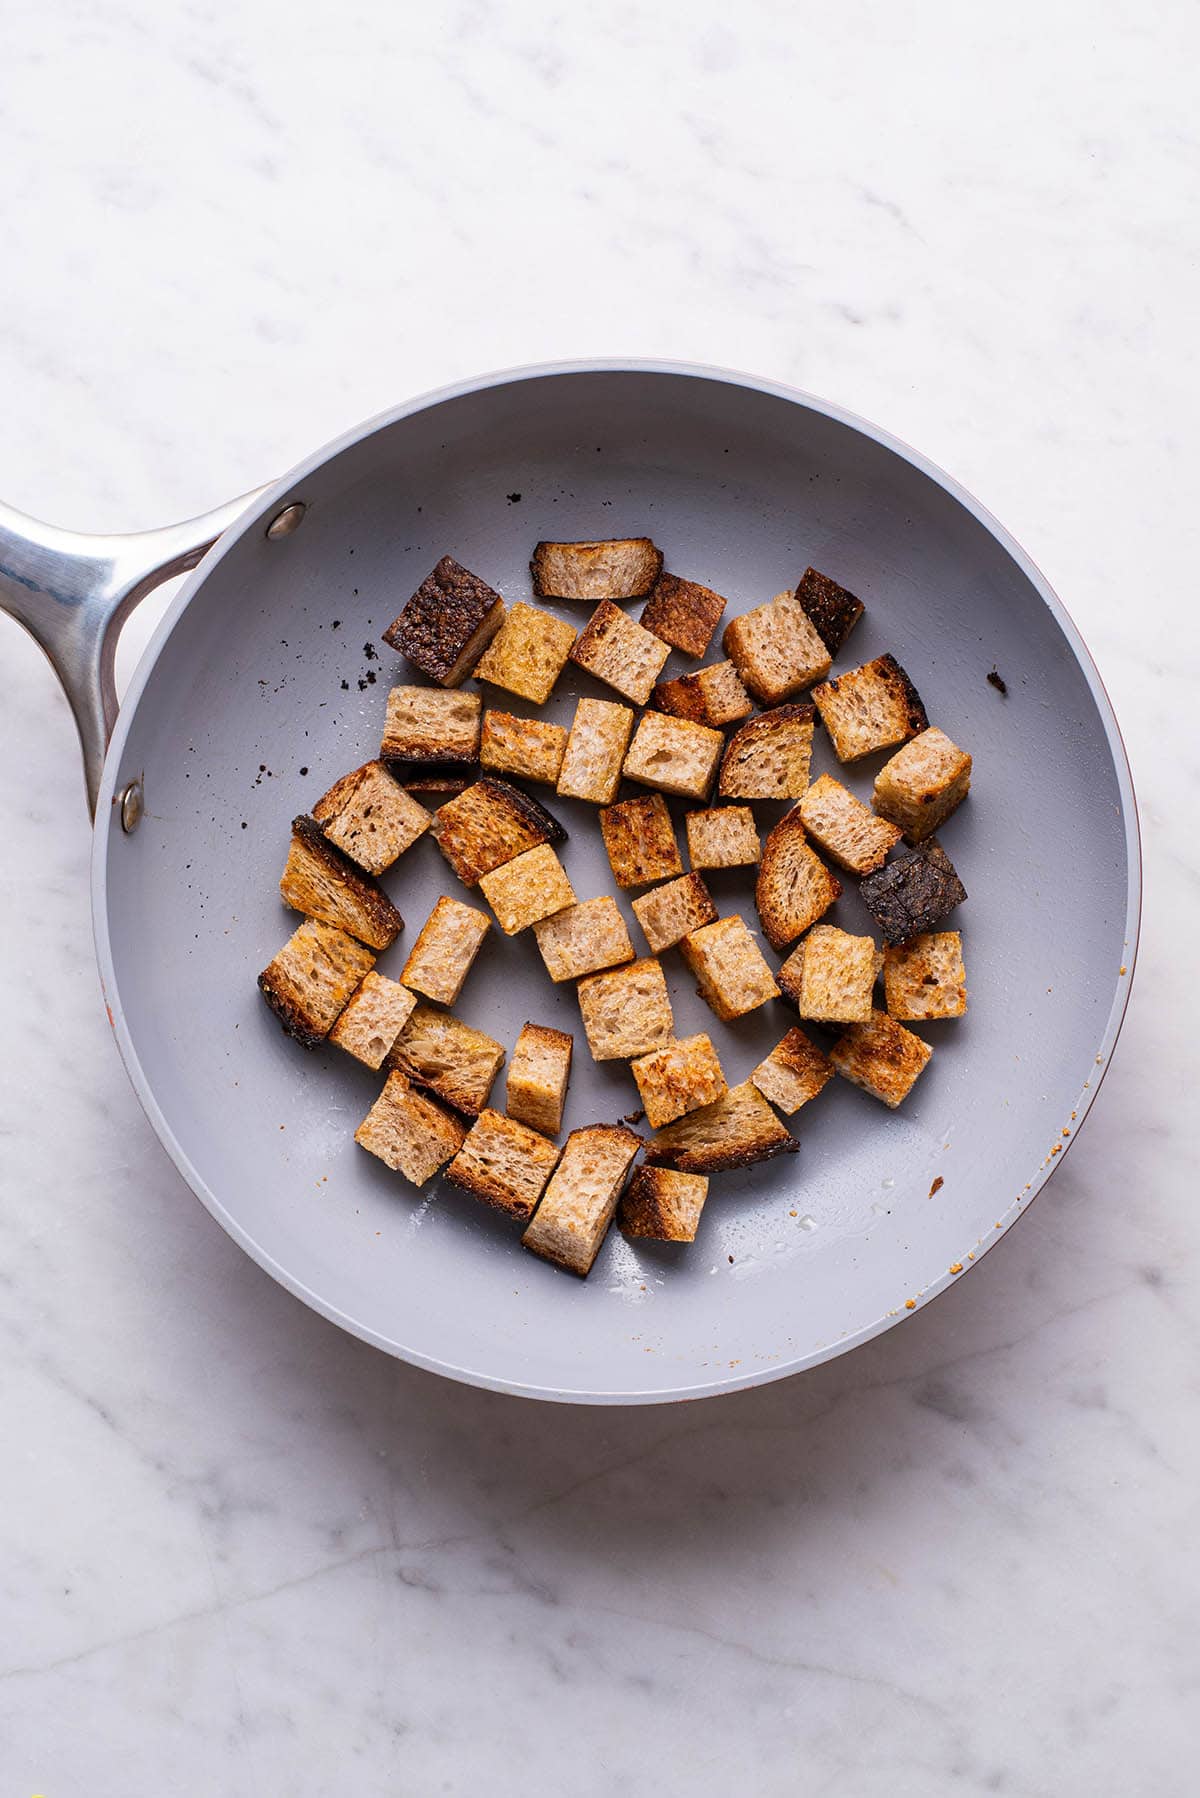 Homemade whole wheat croutons in a skillet.